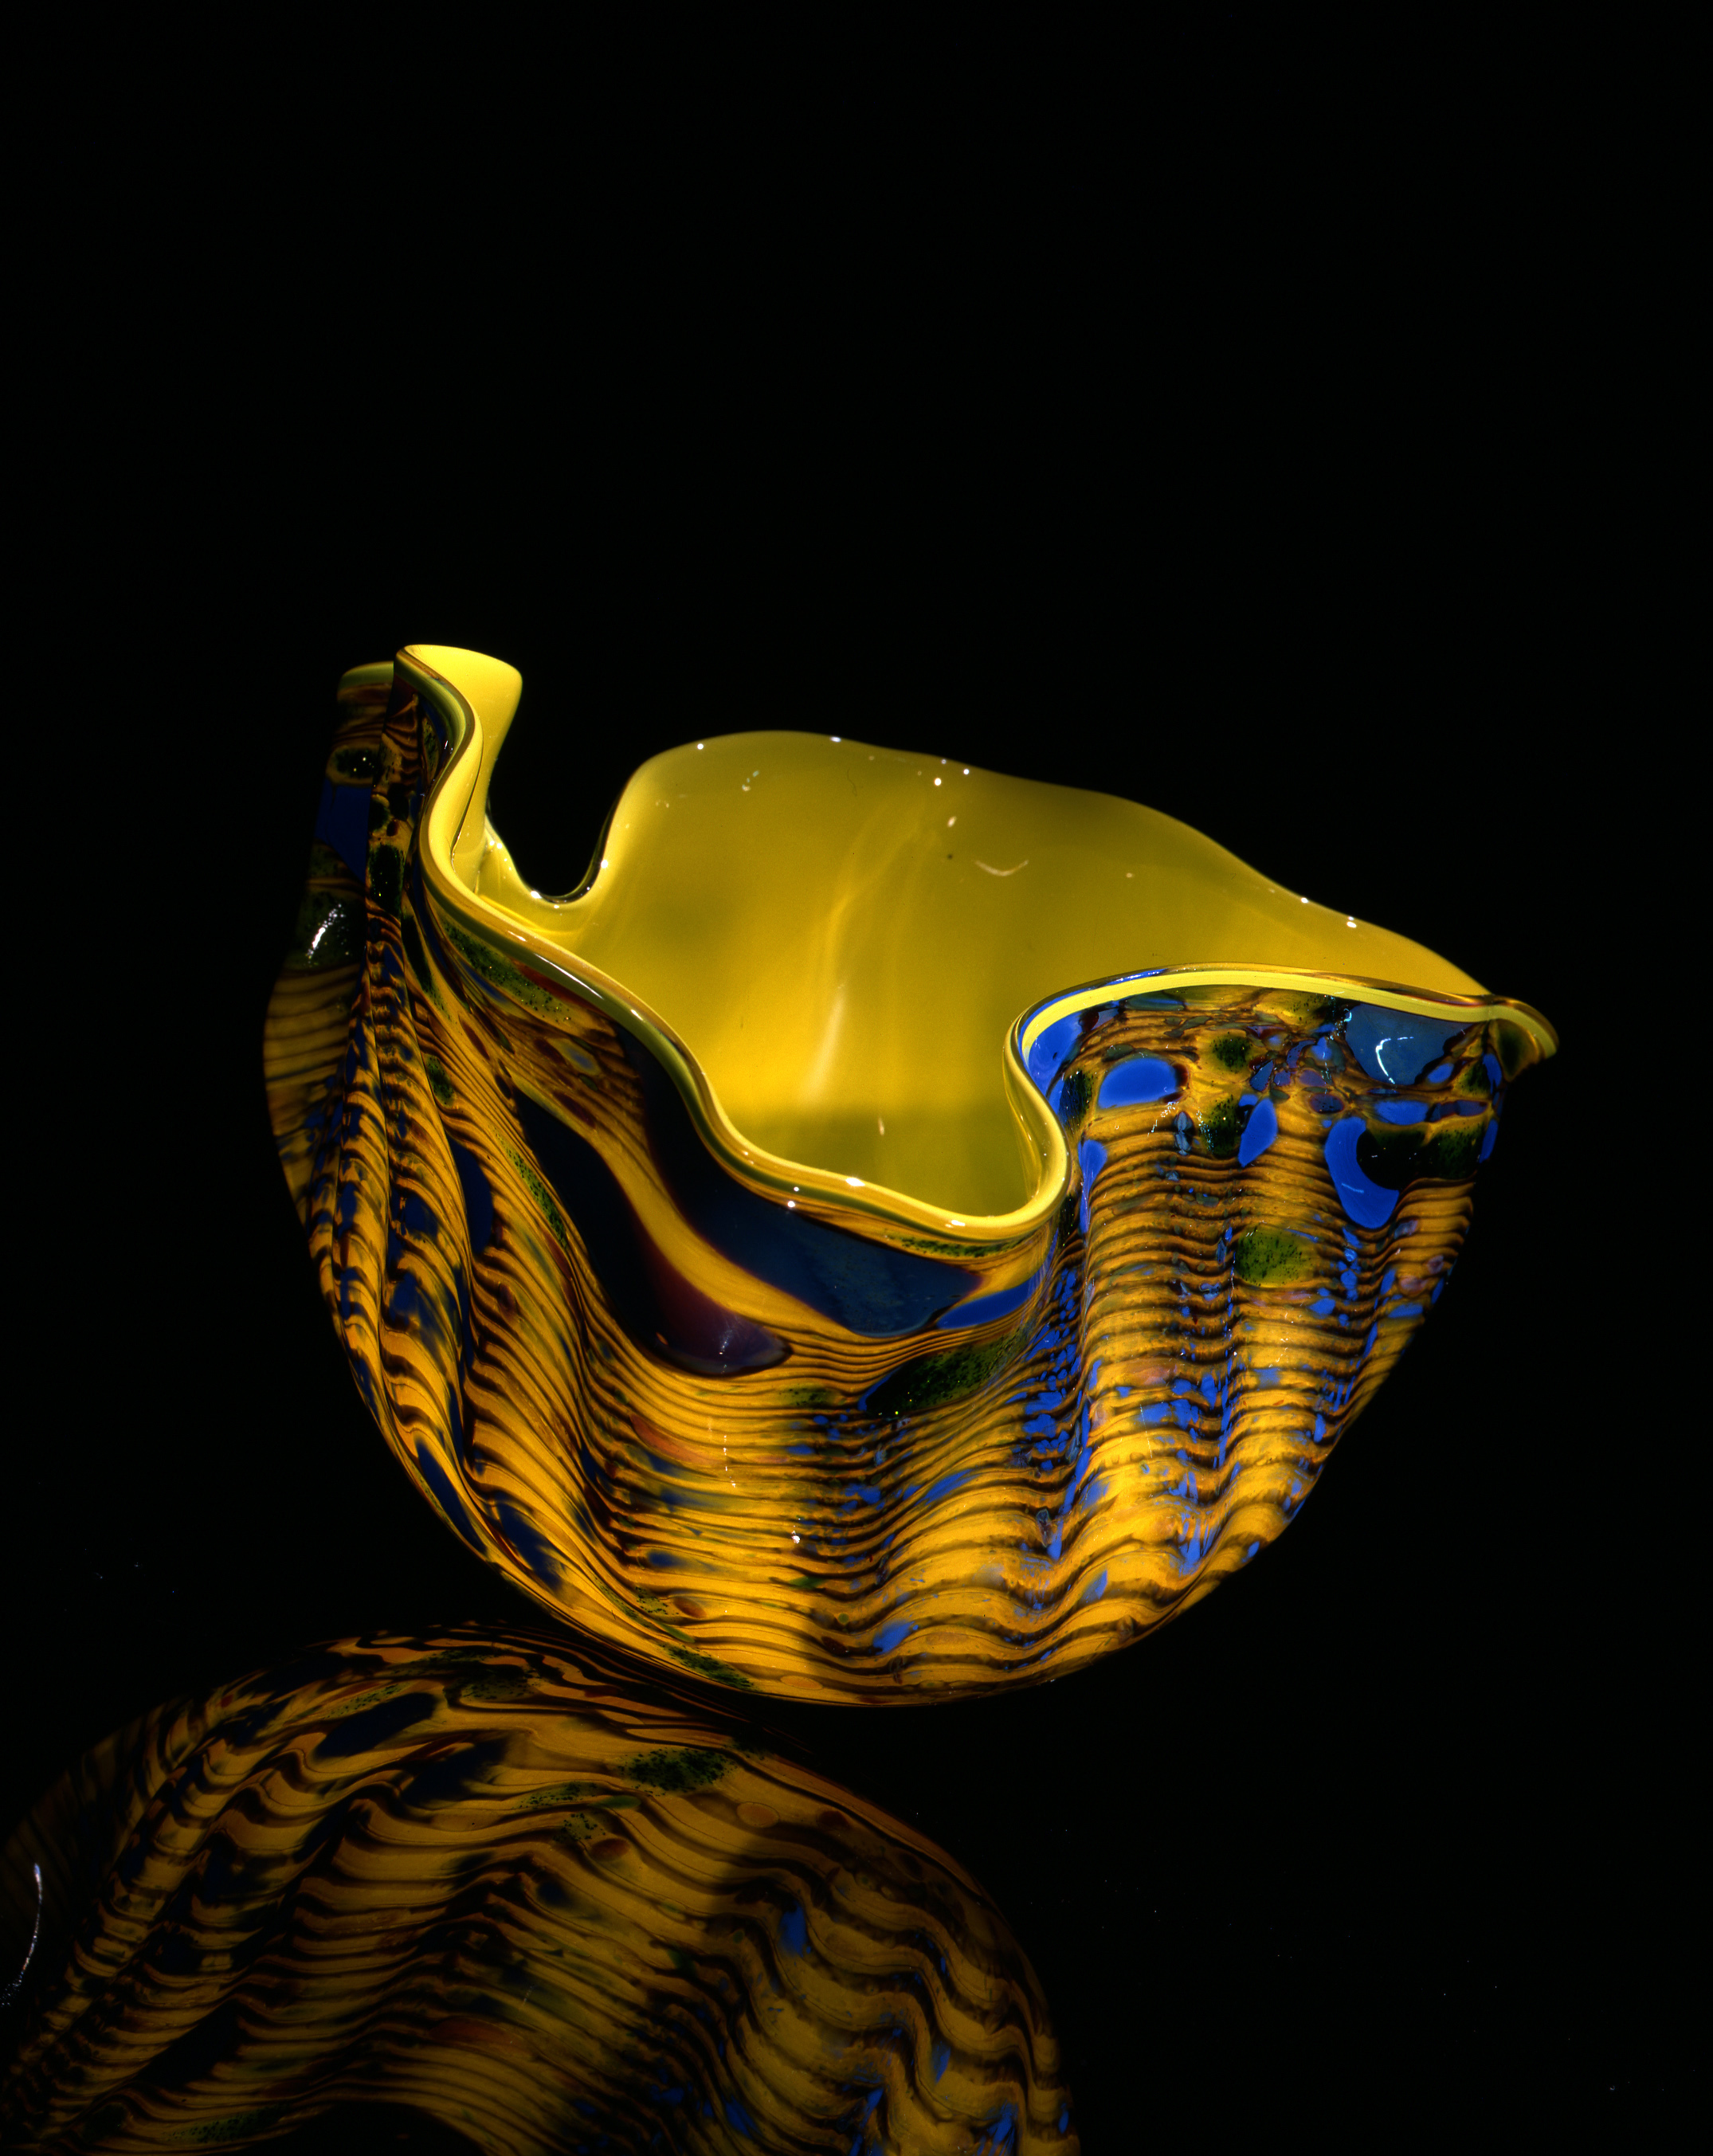  Dale Chihuly,&nbsp; Citron Macchia with Oxblood and Sea Blue Jimmies&nbsp; (1982, glass, 5 x 7 x 7&nbsp;inches), DC.119 